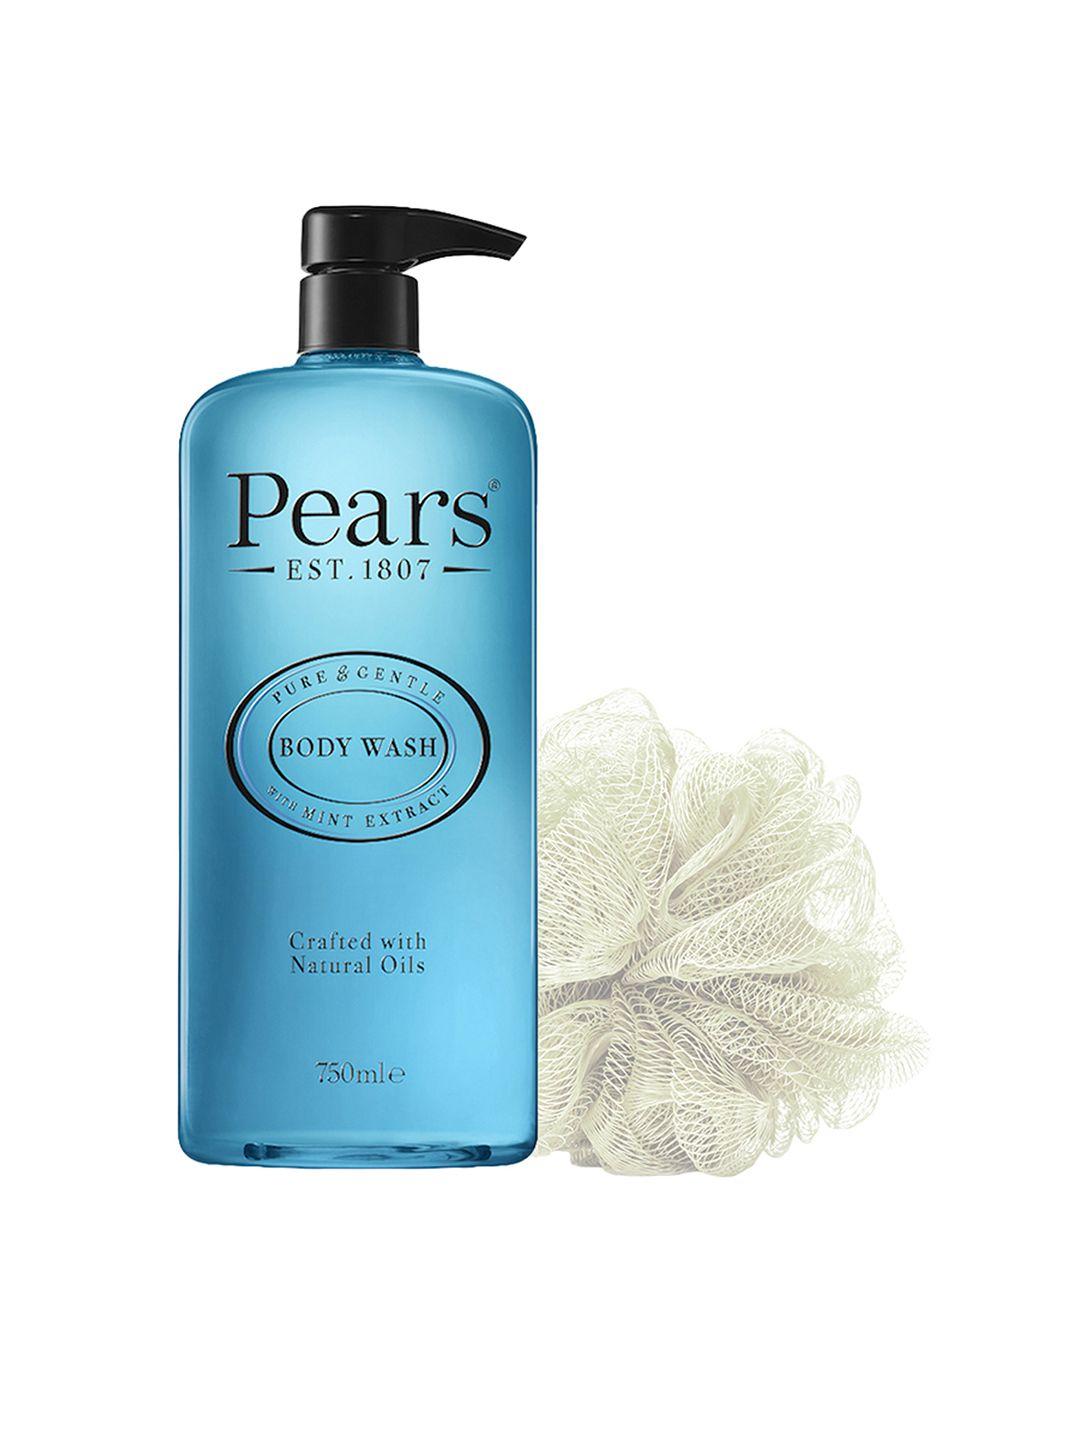 pears pure & gentle 100% soap free mint extracts body wash with loofah 750 ml